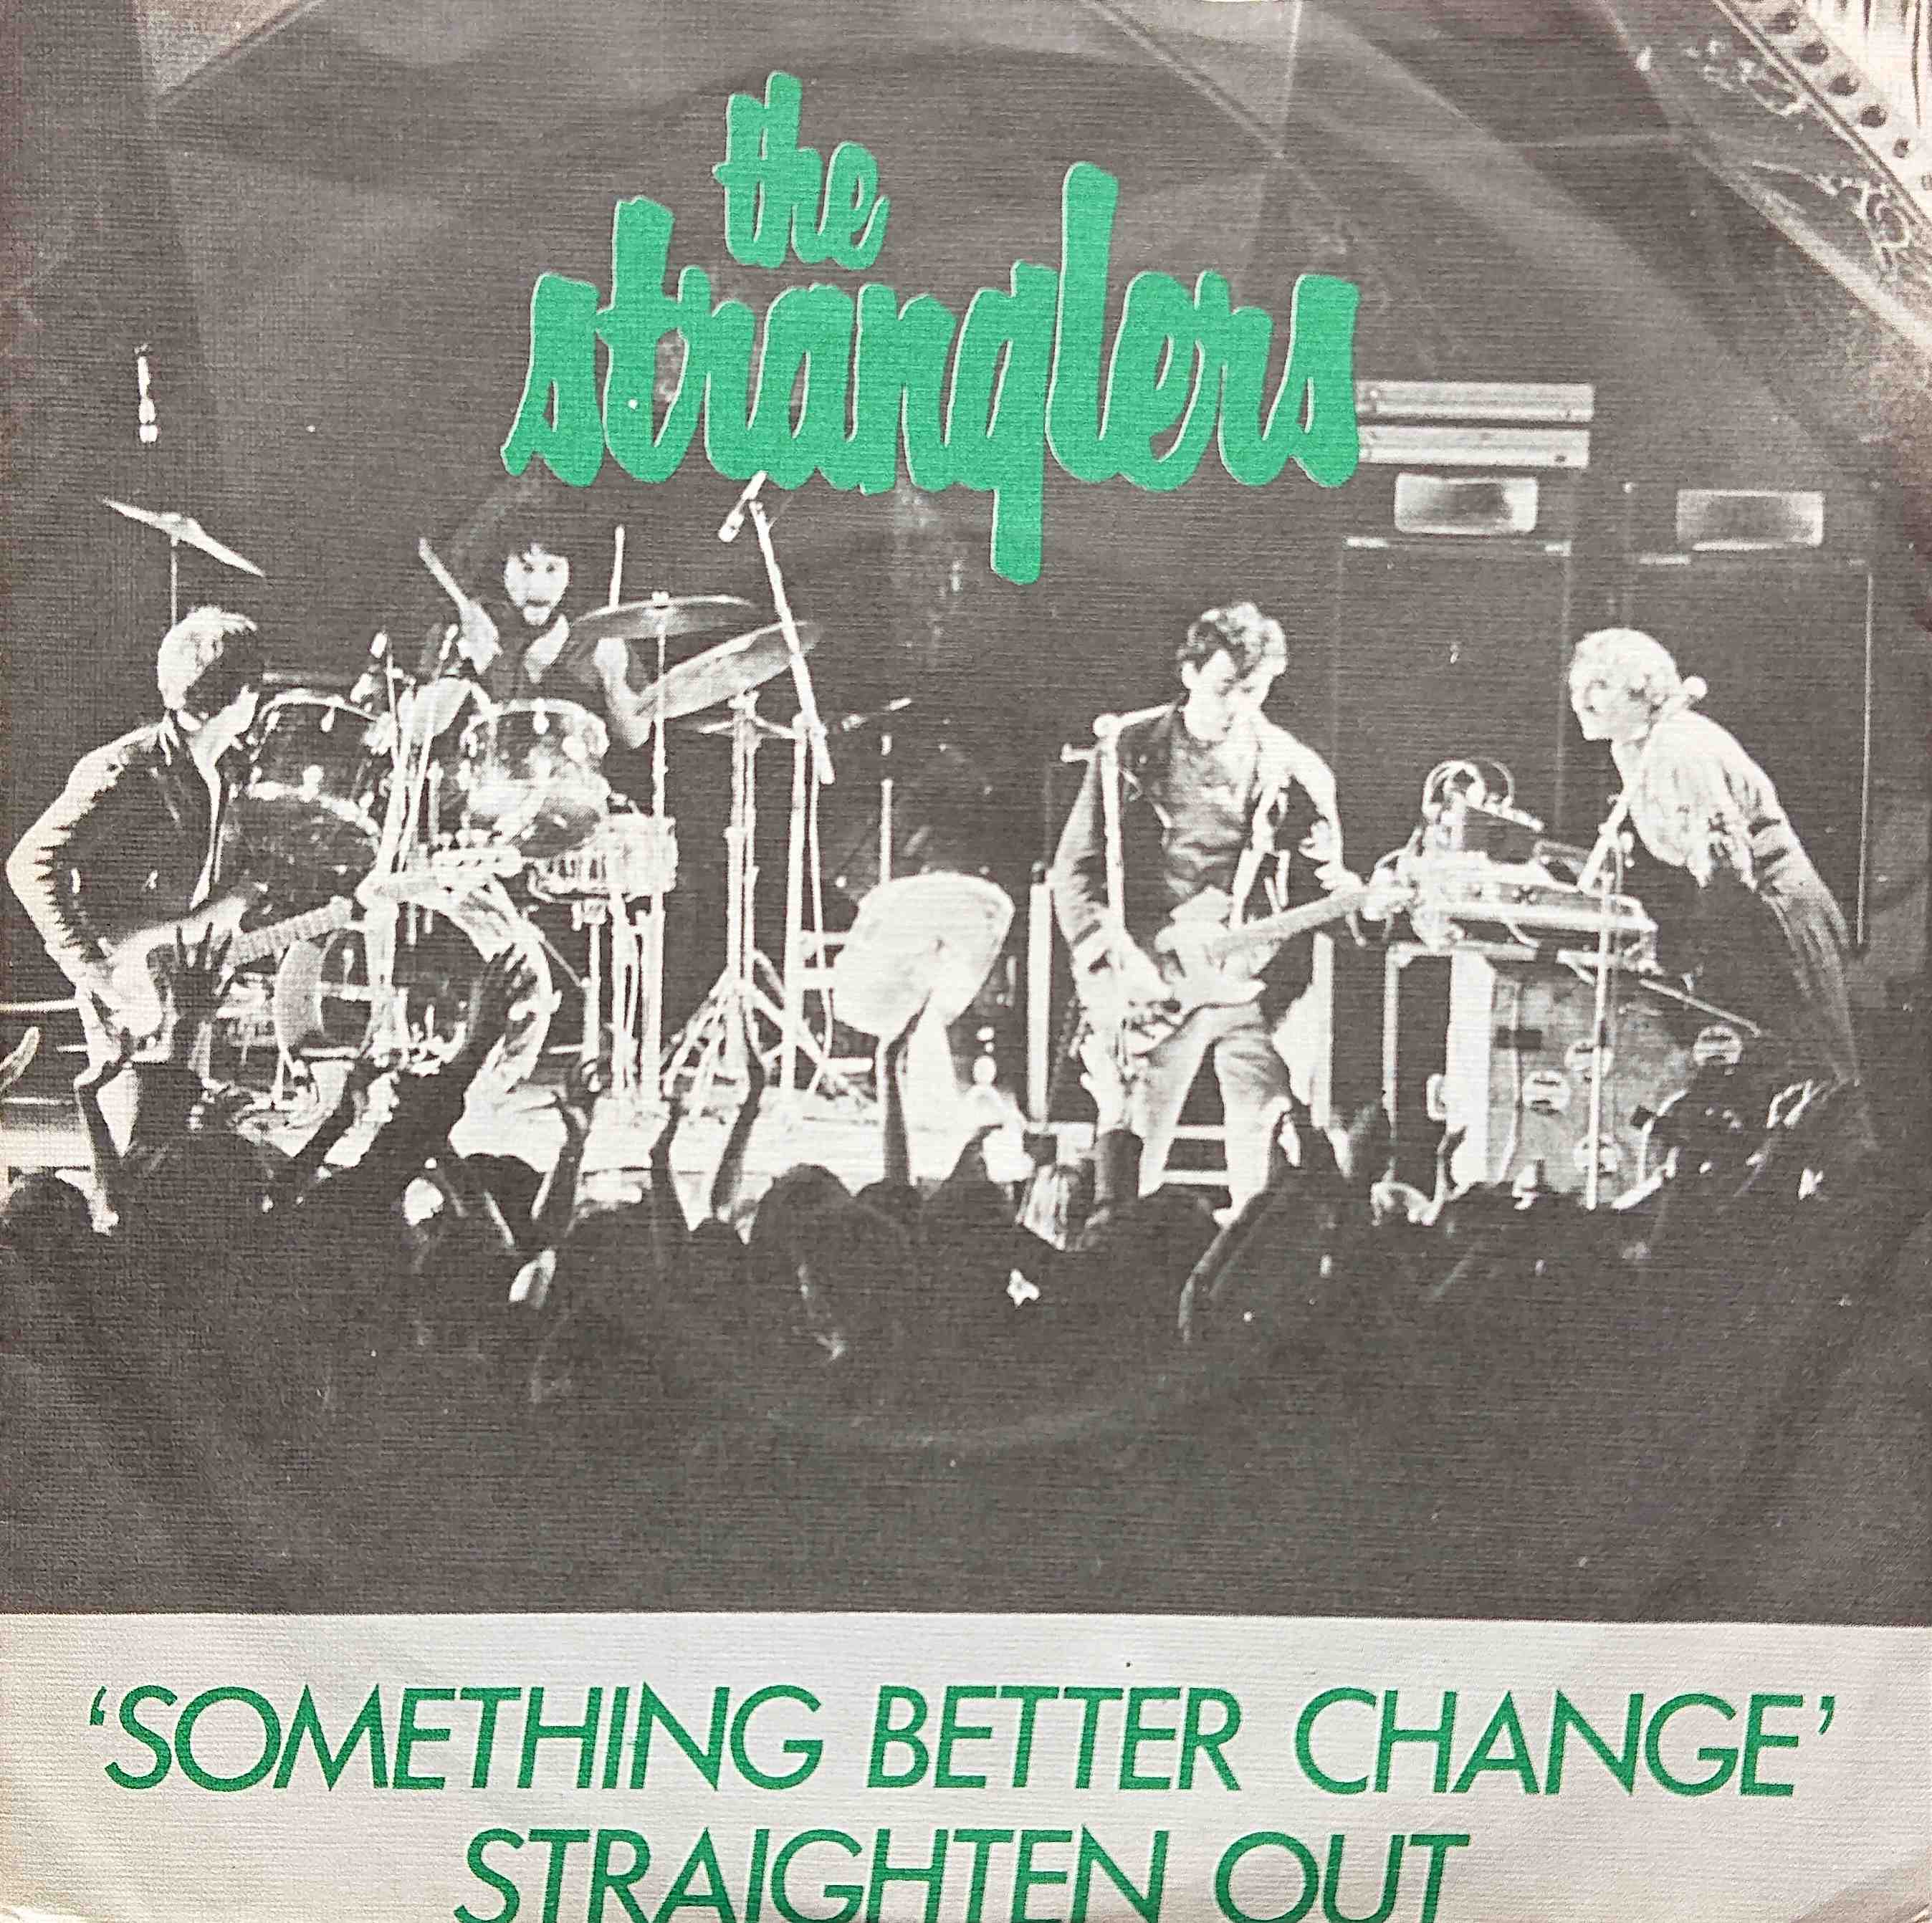 Picture of Something better change by artist The Stranglers  from The Stranglers singles